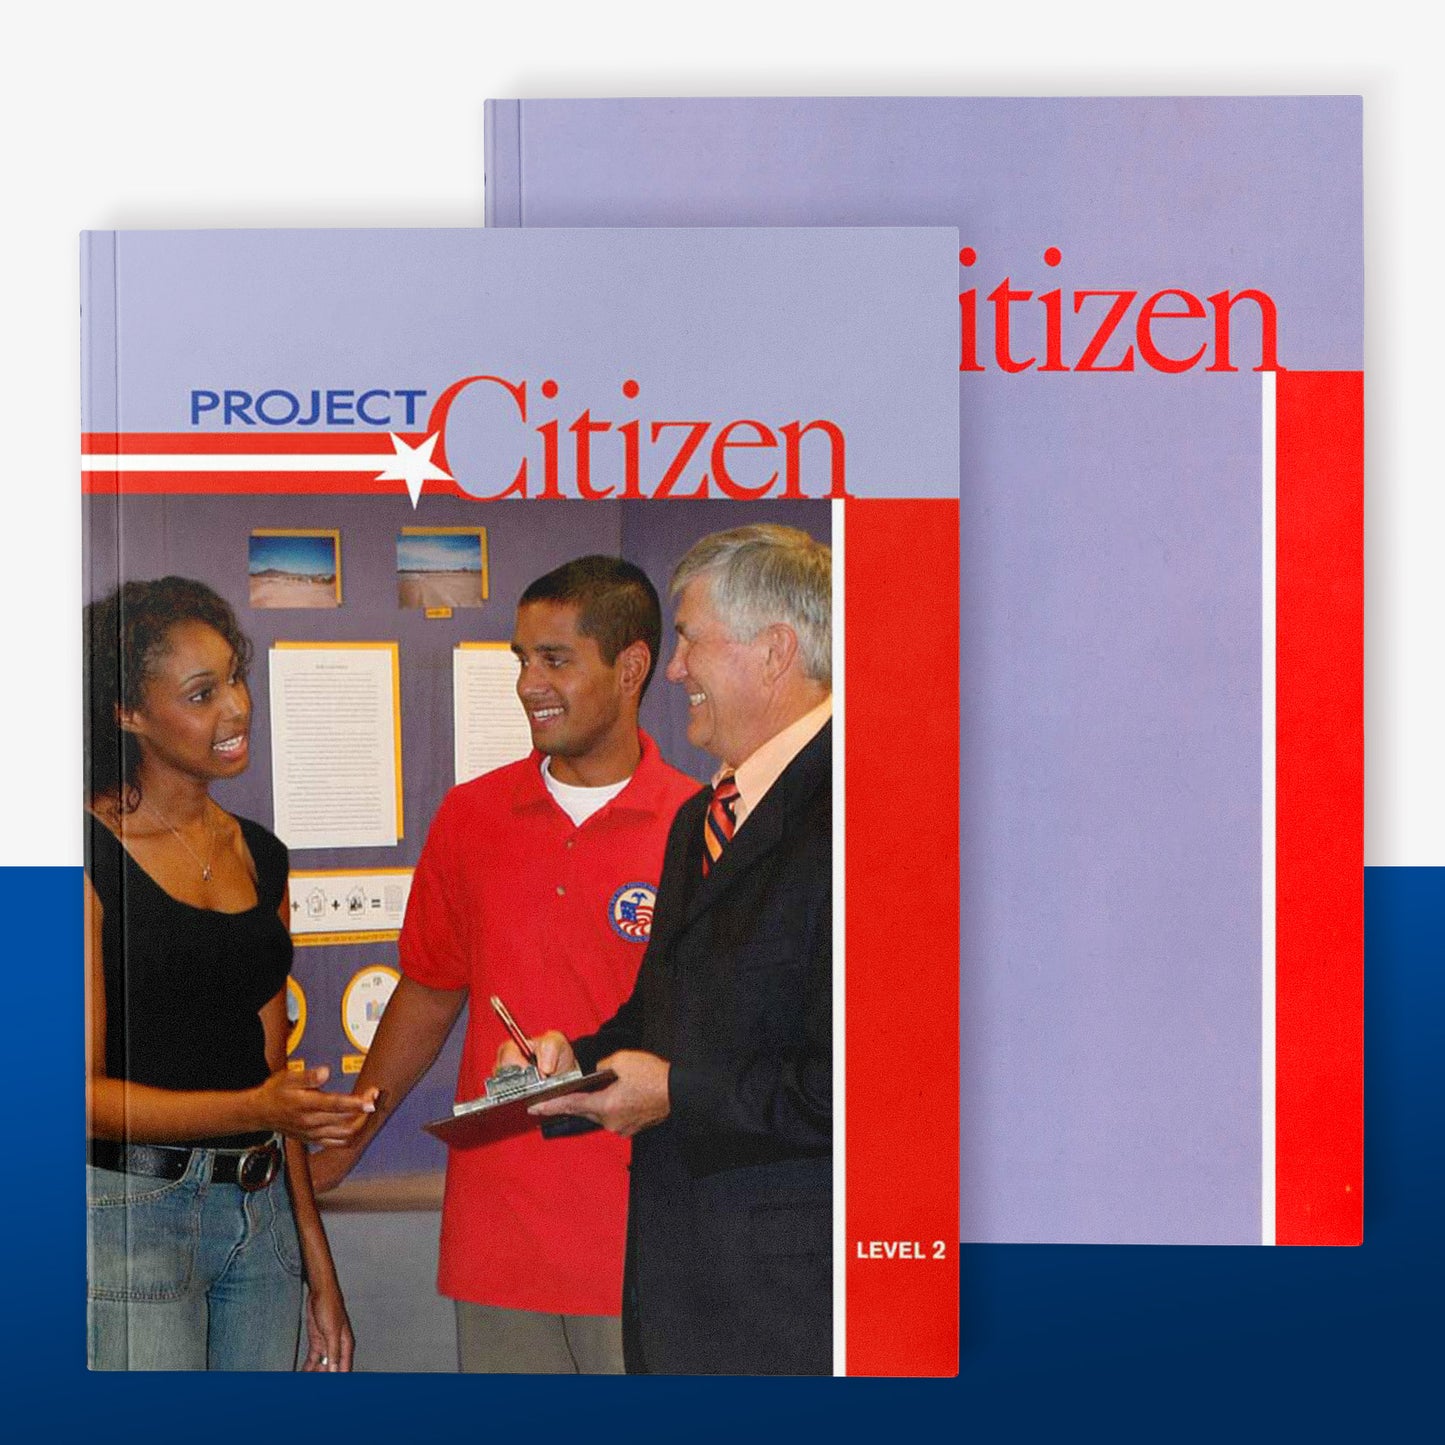 Project Citizen: Community Engagement in Public Policy (Level 2: High School) (Classroom Set)